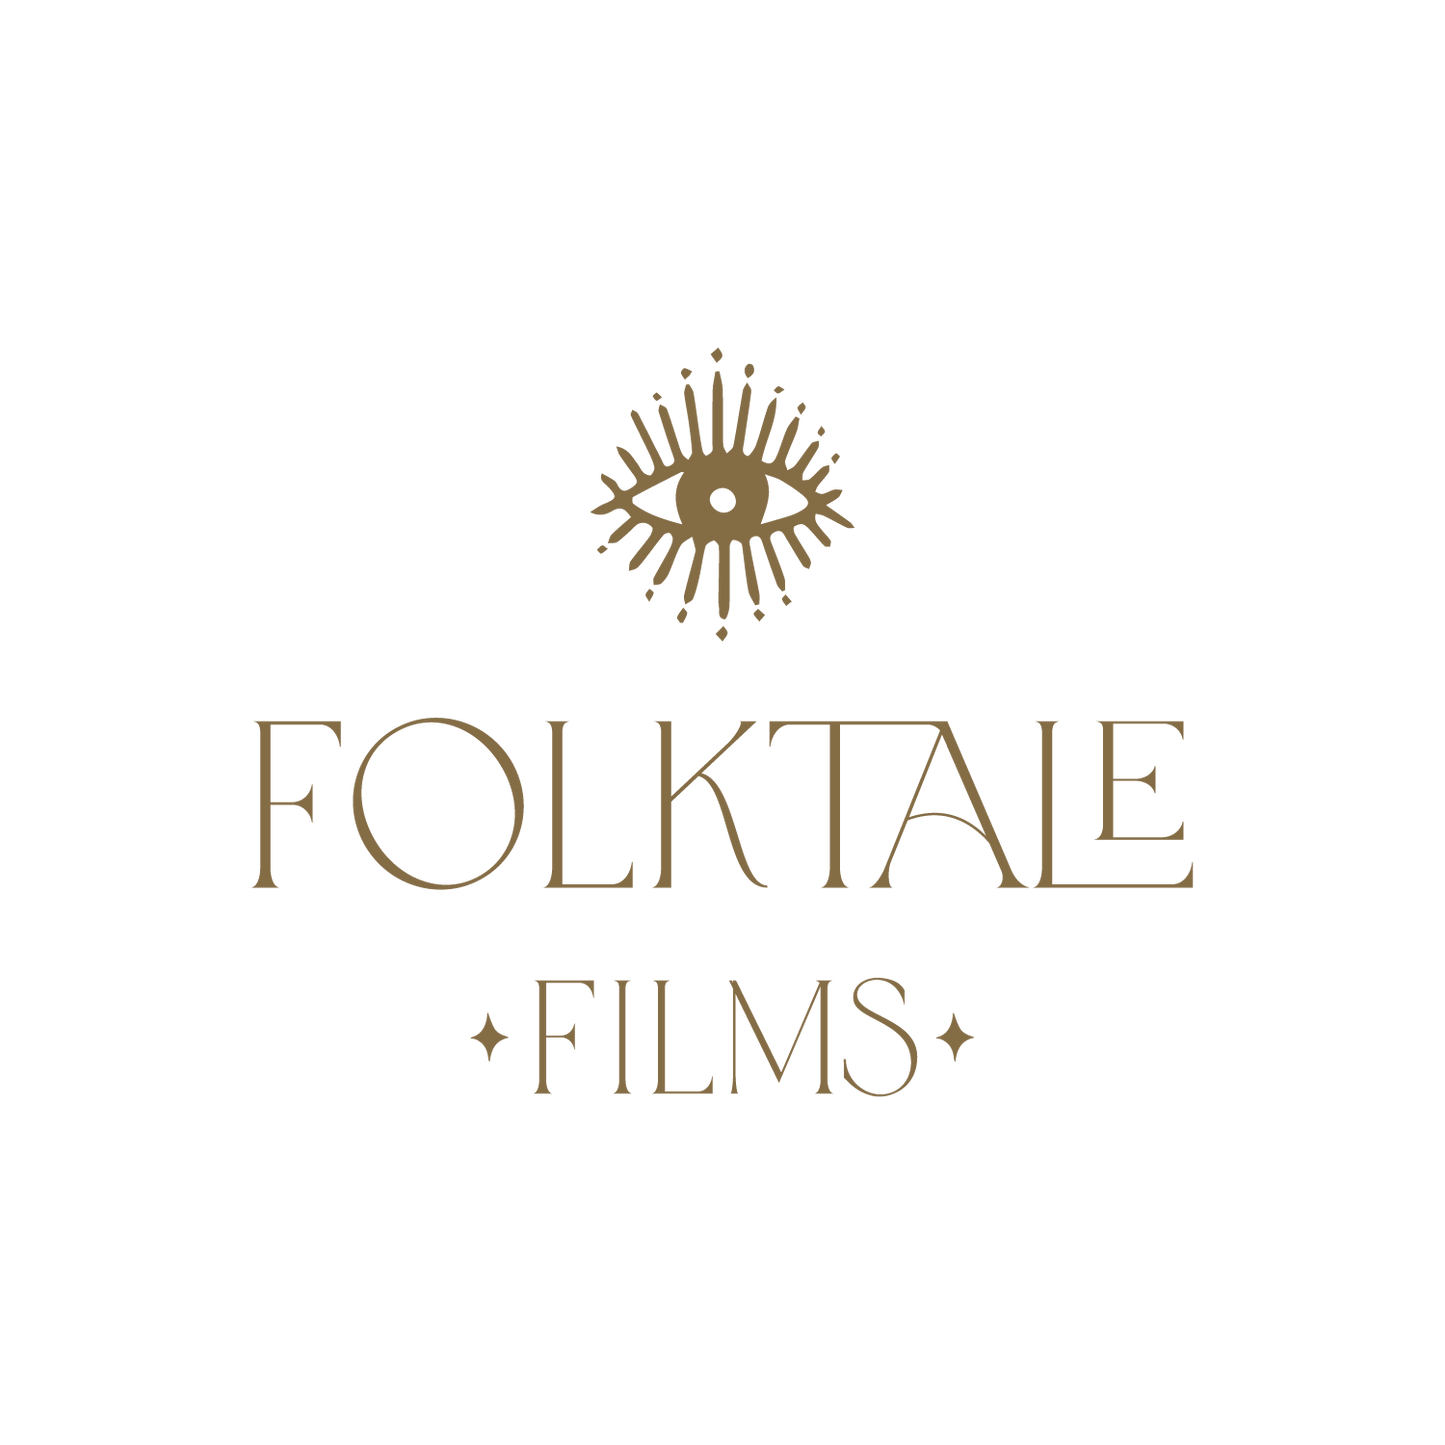 Picture of the Folktale Films logo in gold on a white background